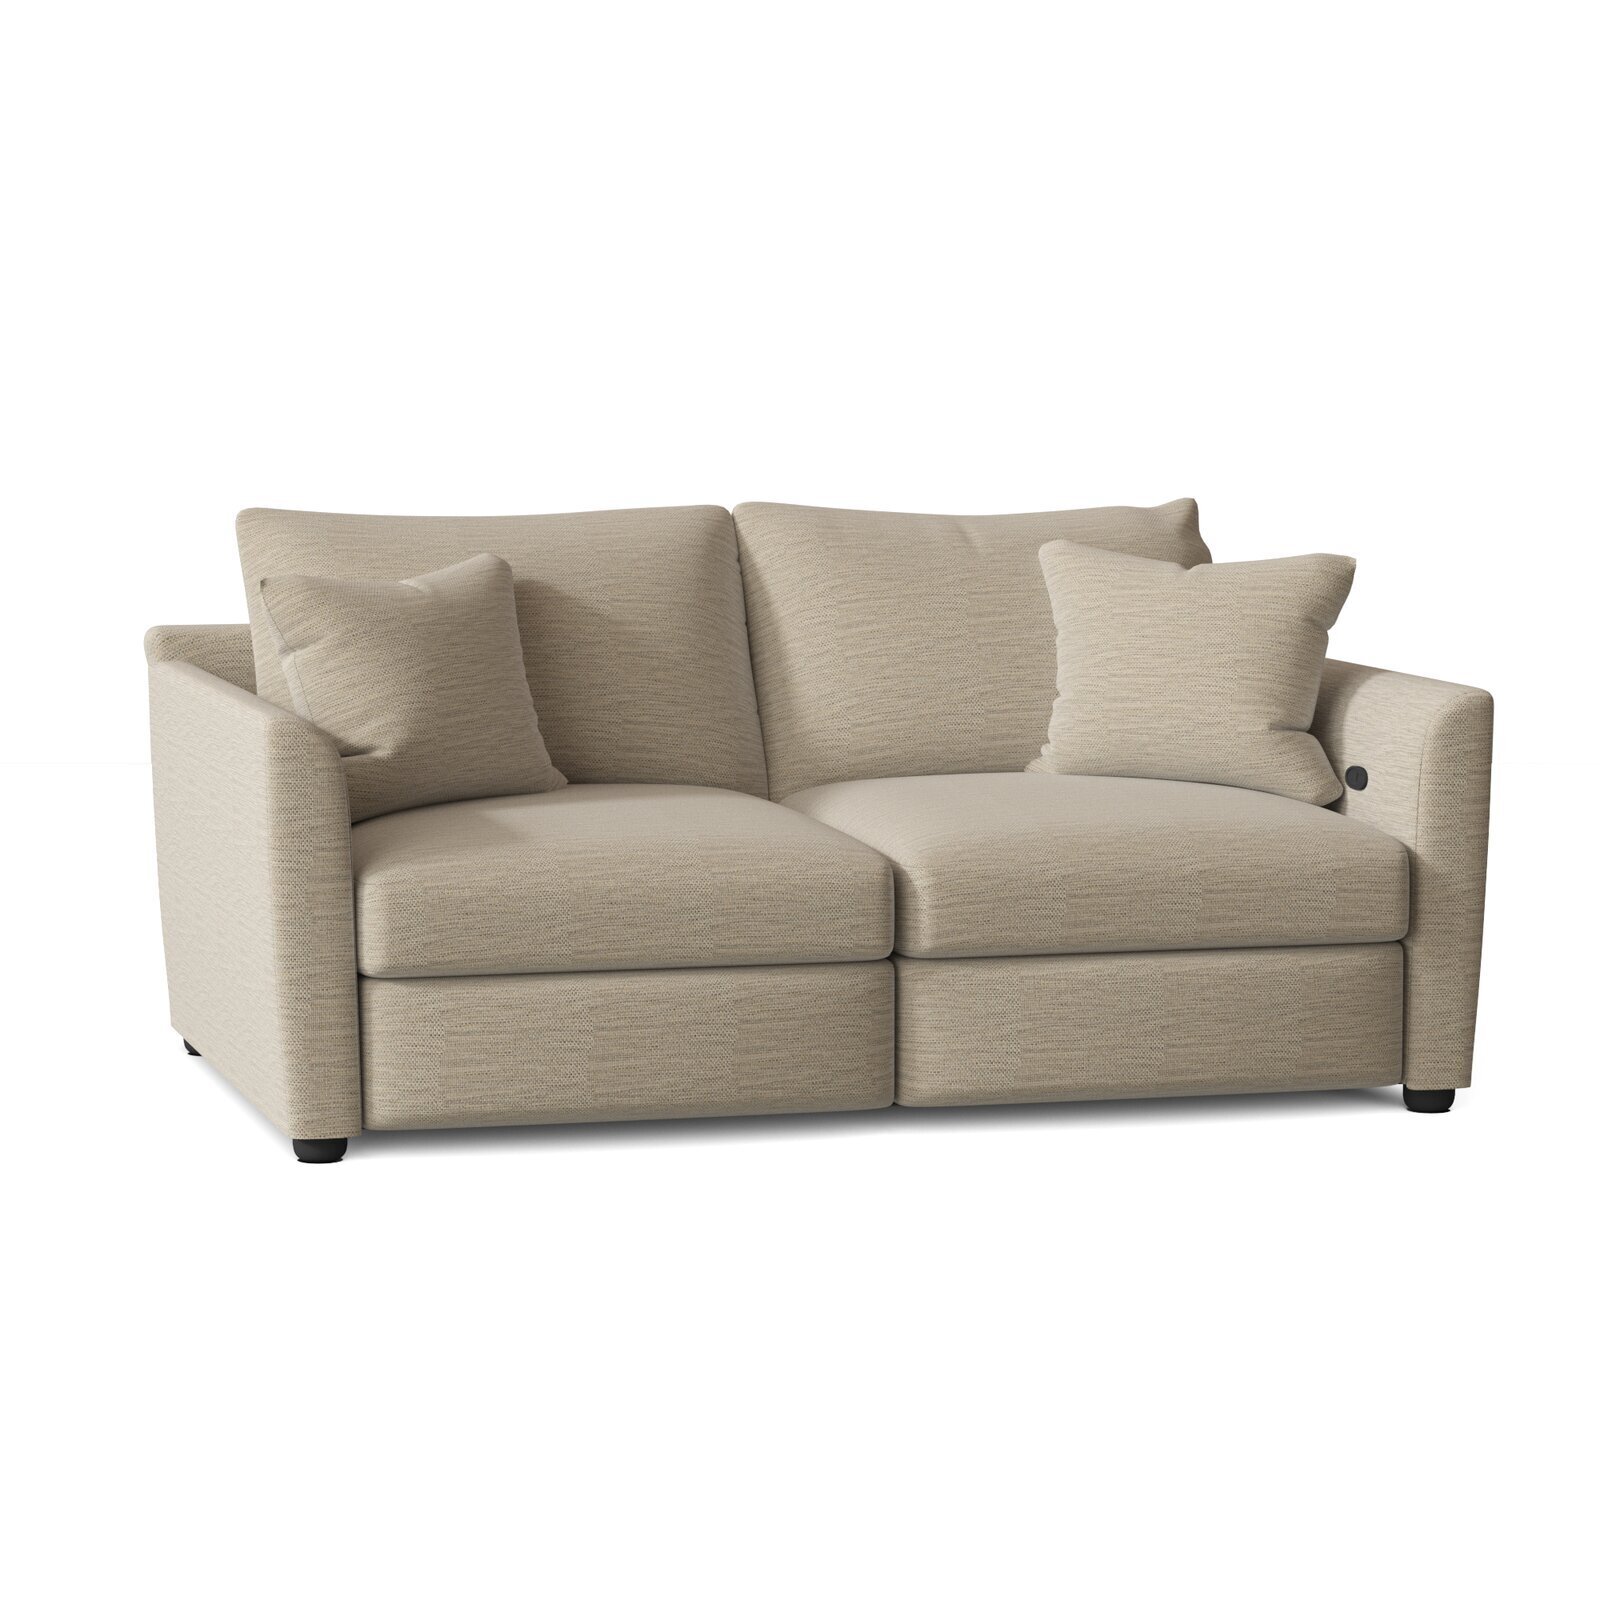 Low Recliner Sofa Small Space